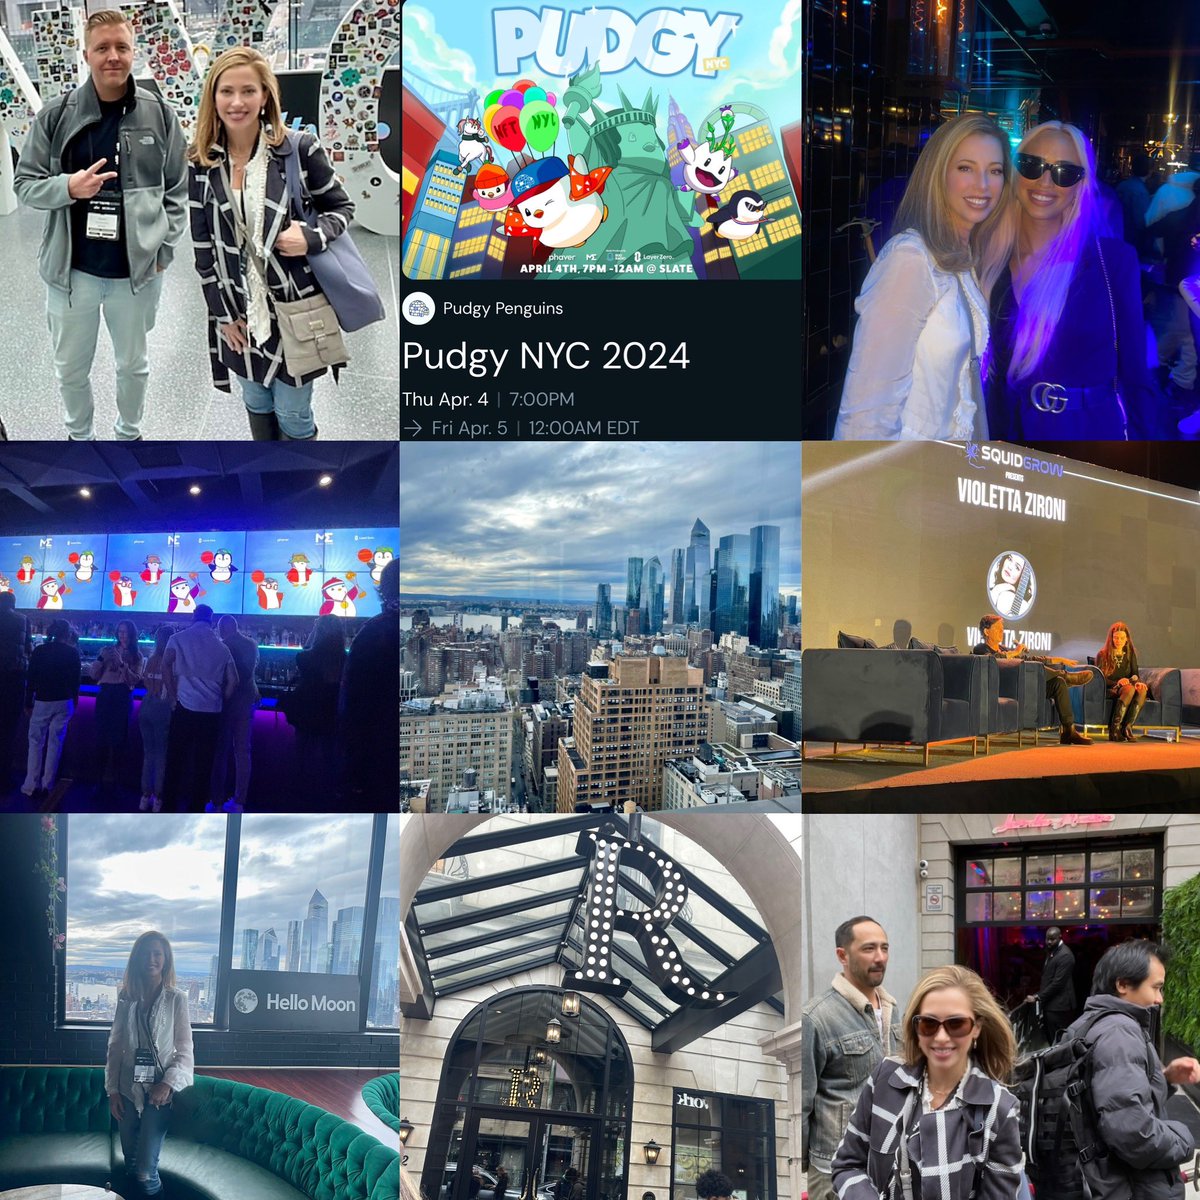 Few more pics from #NFTNYC2024. Not even rain or an earthquake could spoil the fun. 😳 Big thank you to @gianinaskarlett for invites to some amazing events! Loved meeting so many cool web3 peeps IRL. See you in spaces! 💖